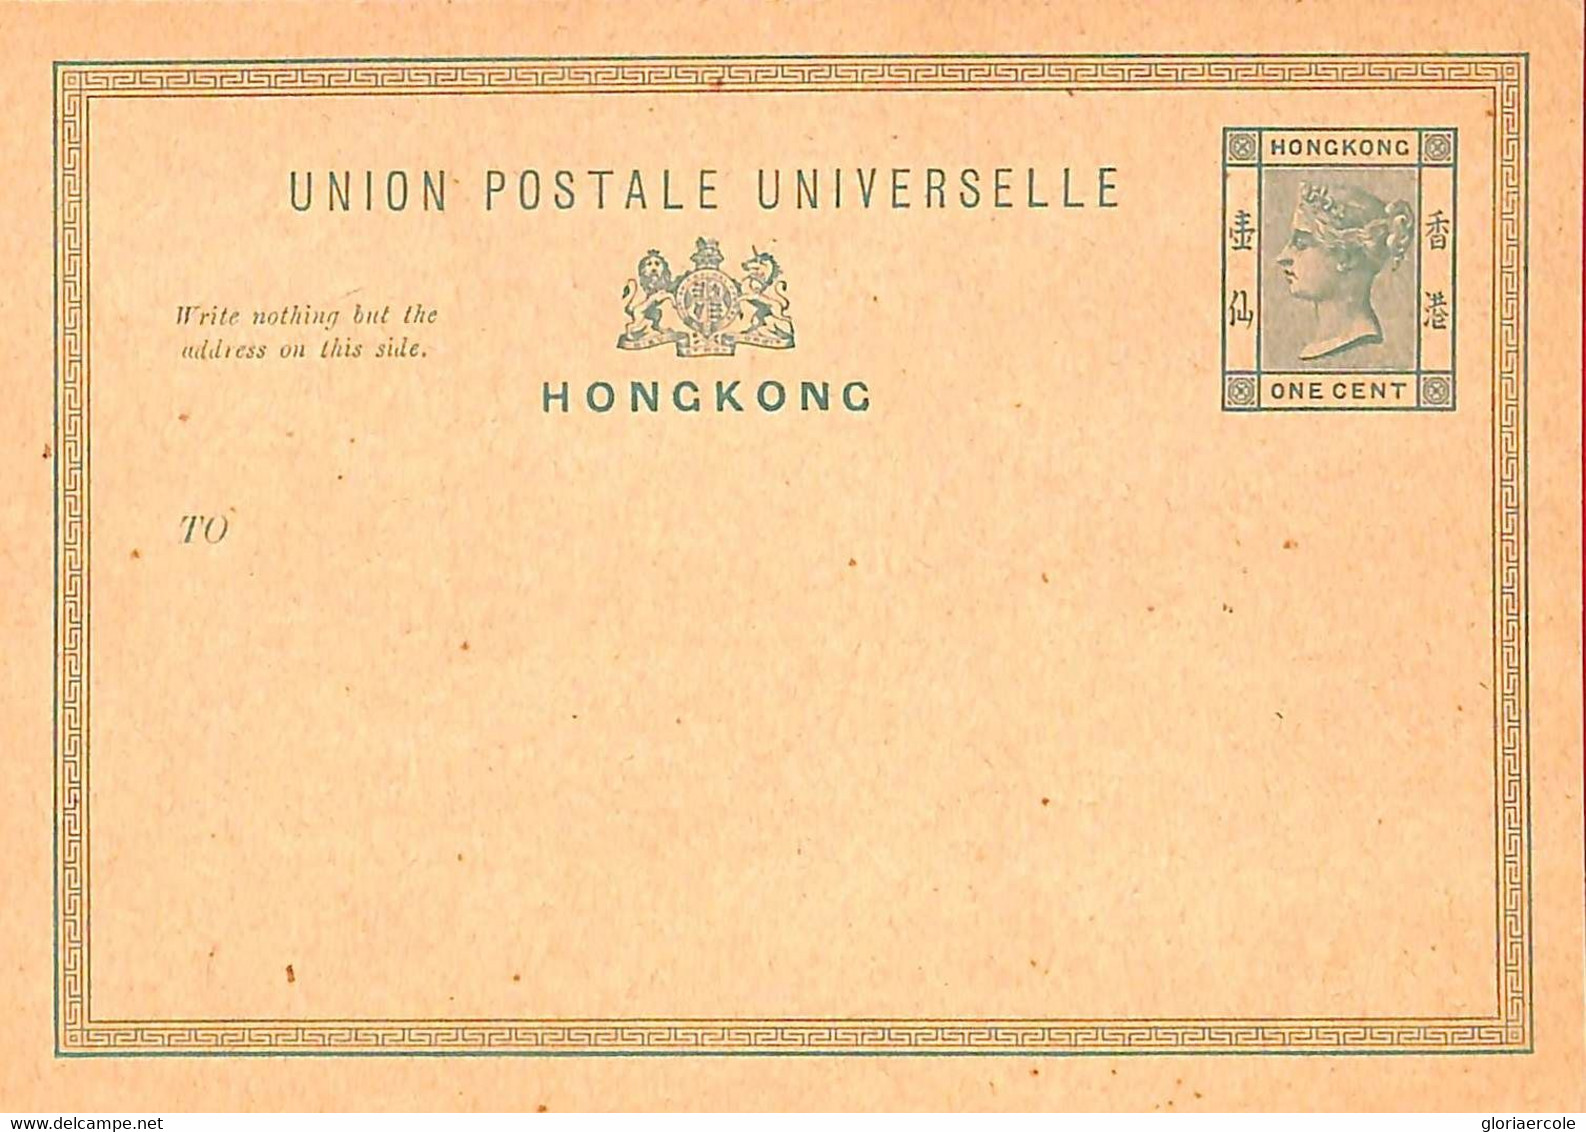 Aa6774 - HONG KONG - POSTAL HISTORY -  Postal STATIONERY CARD  1 Cent - Entiers Postaux